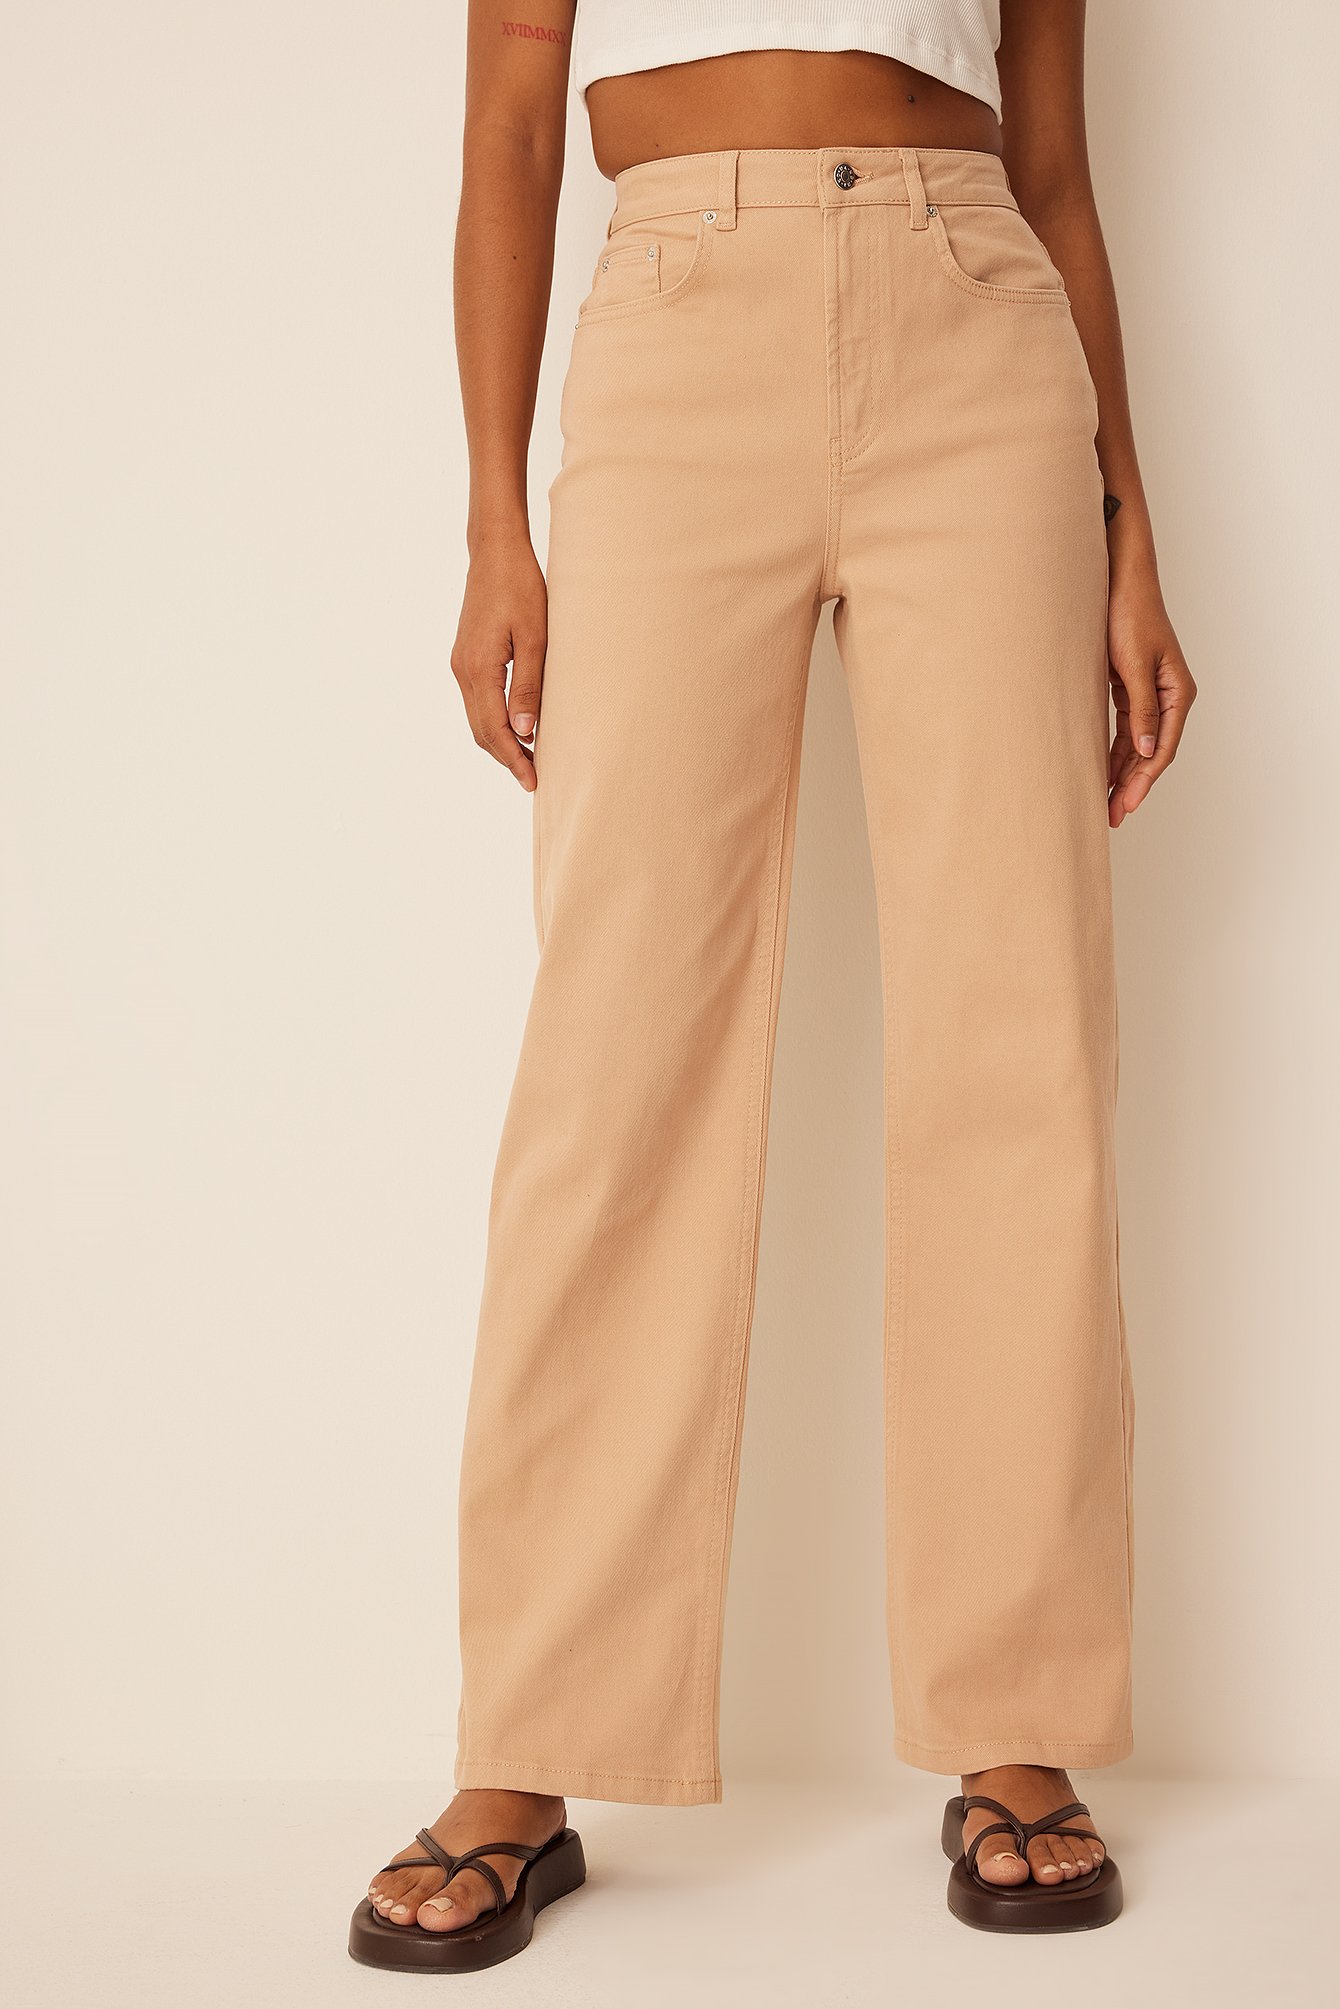 Womens Beige High Waisted Jeans